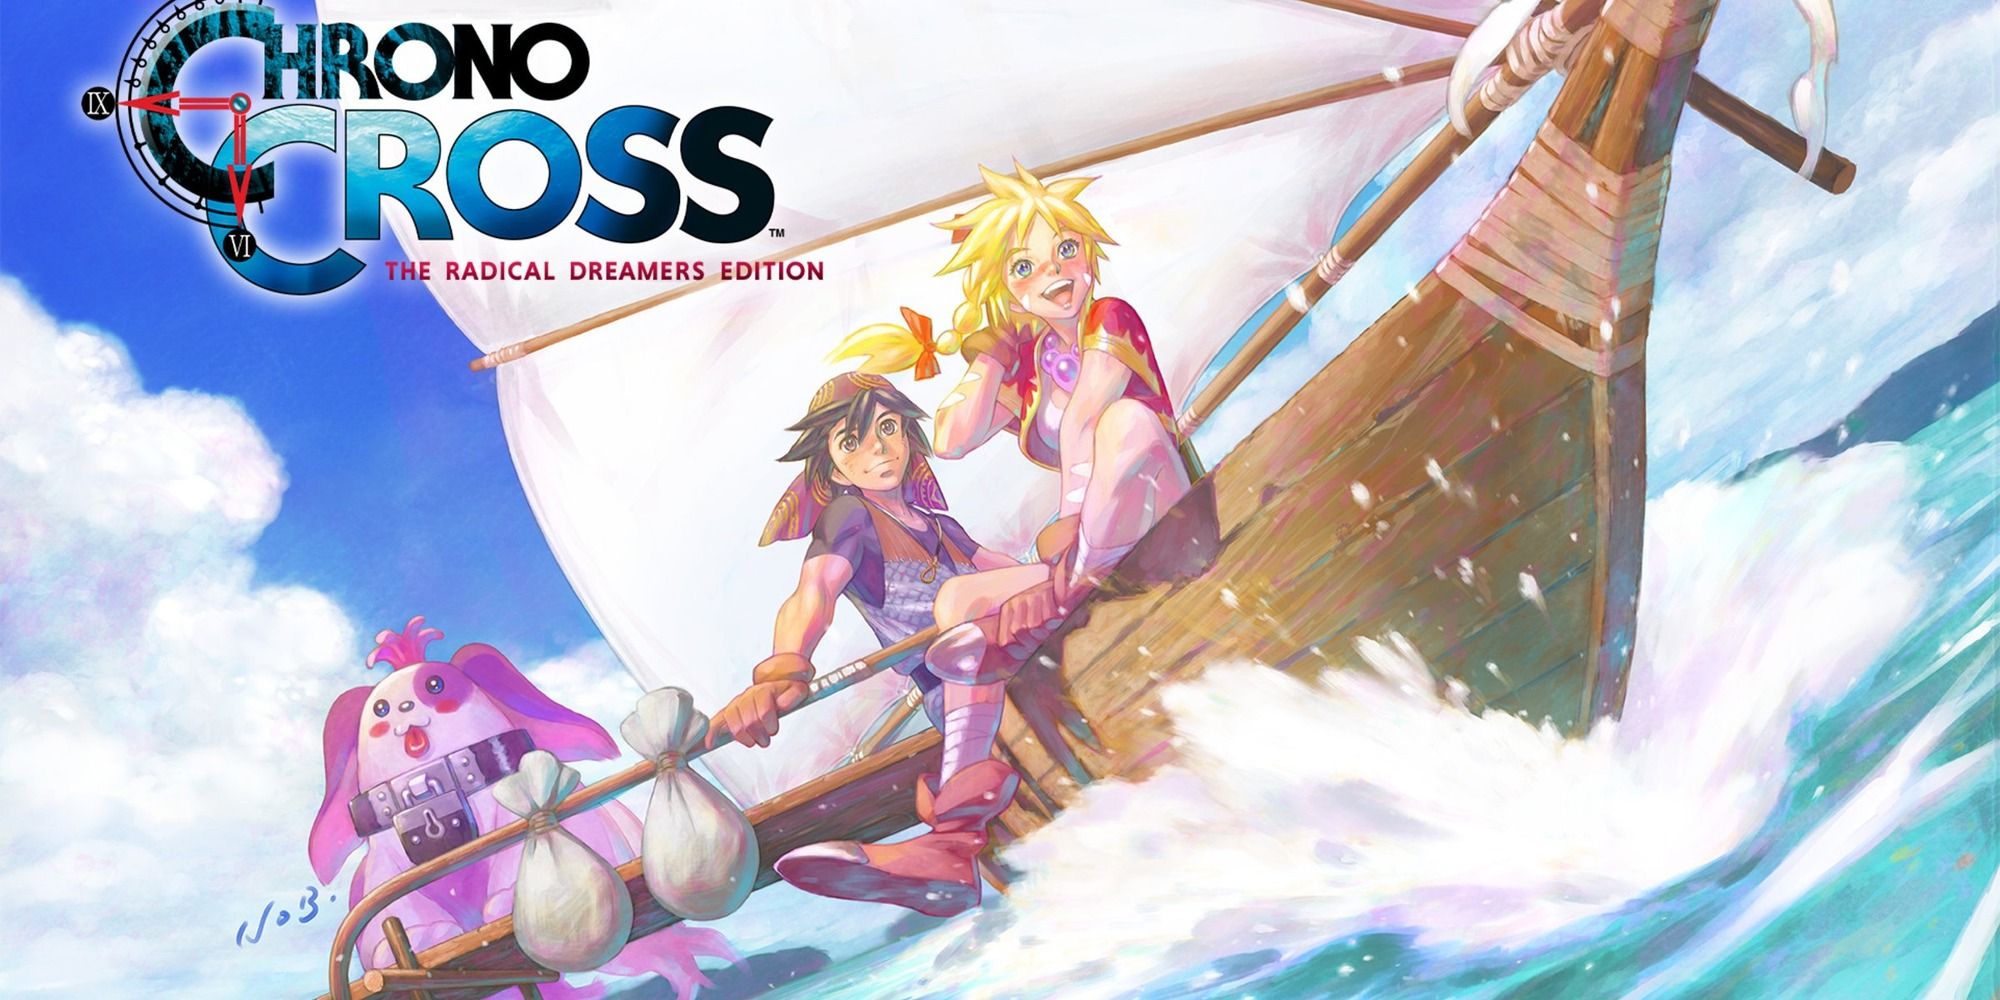 Chrono Cross The Radical Dreamers Edition remake remaster promotional art on ship